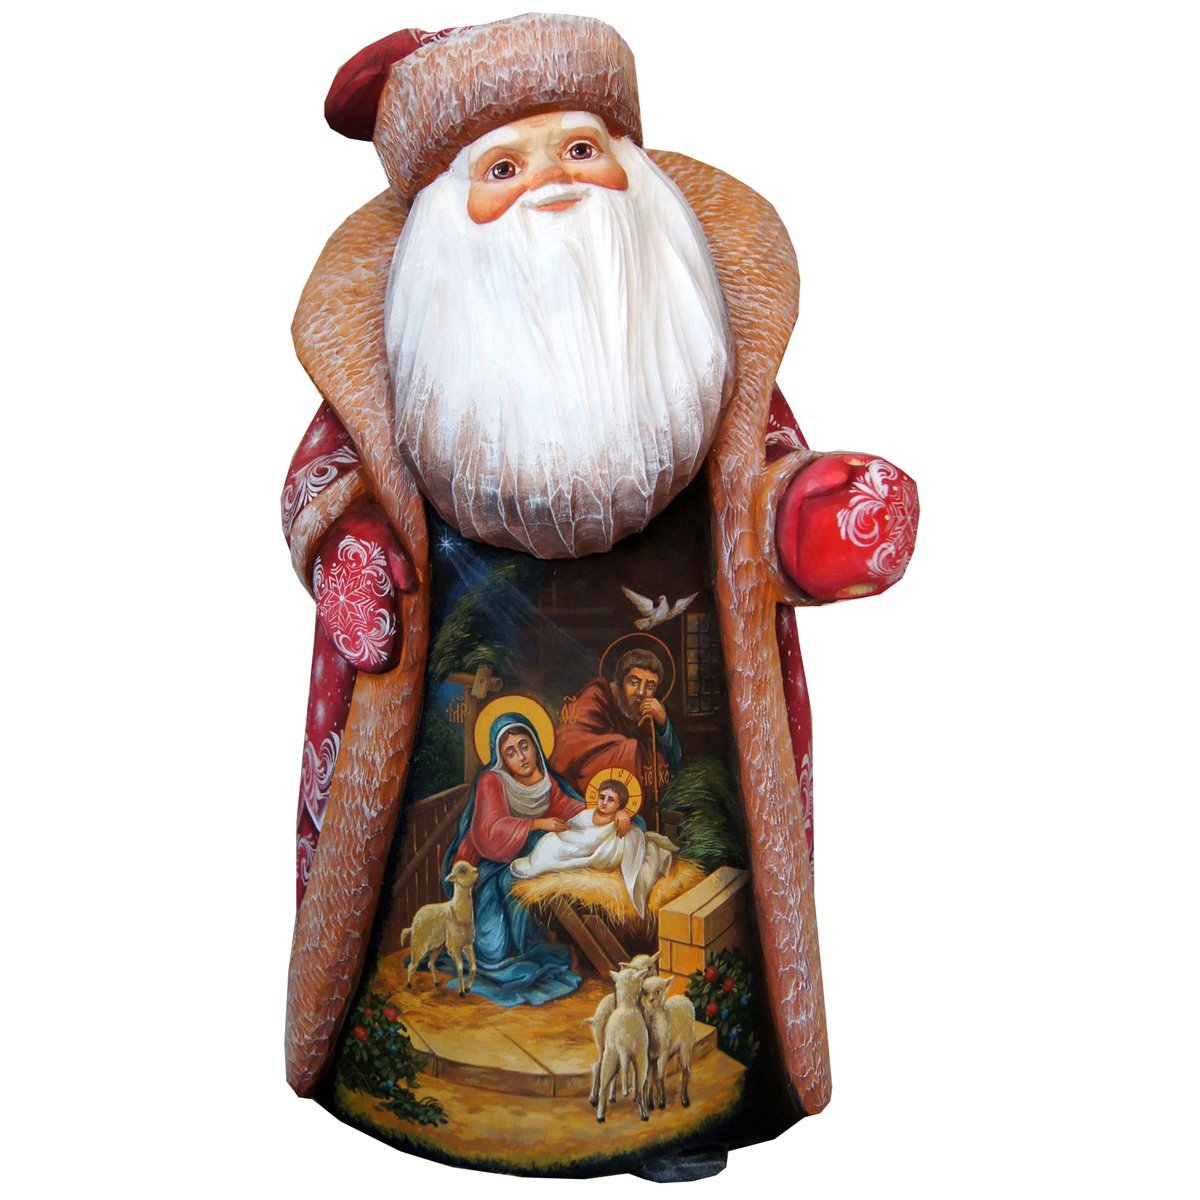 Picture of G.DeBrekht 28214942 Message of Faith Santa Figurine - Wood Carved & Hand Painted